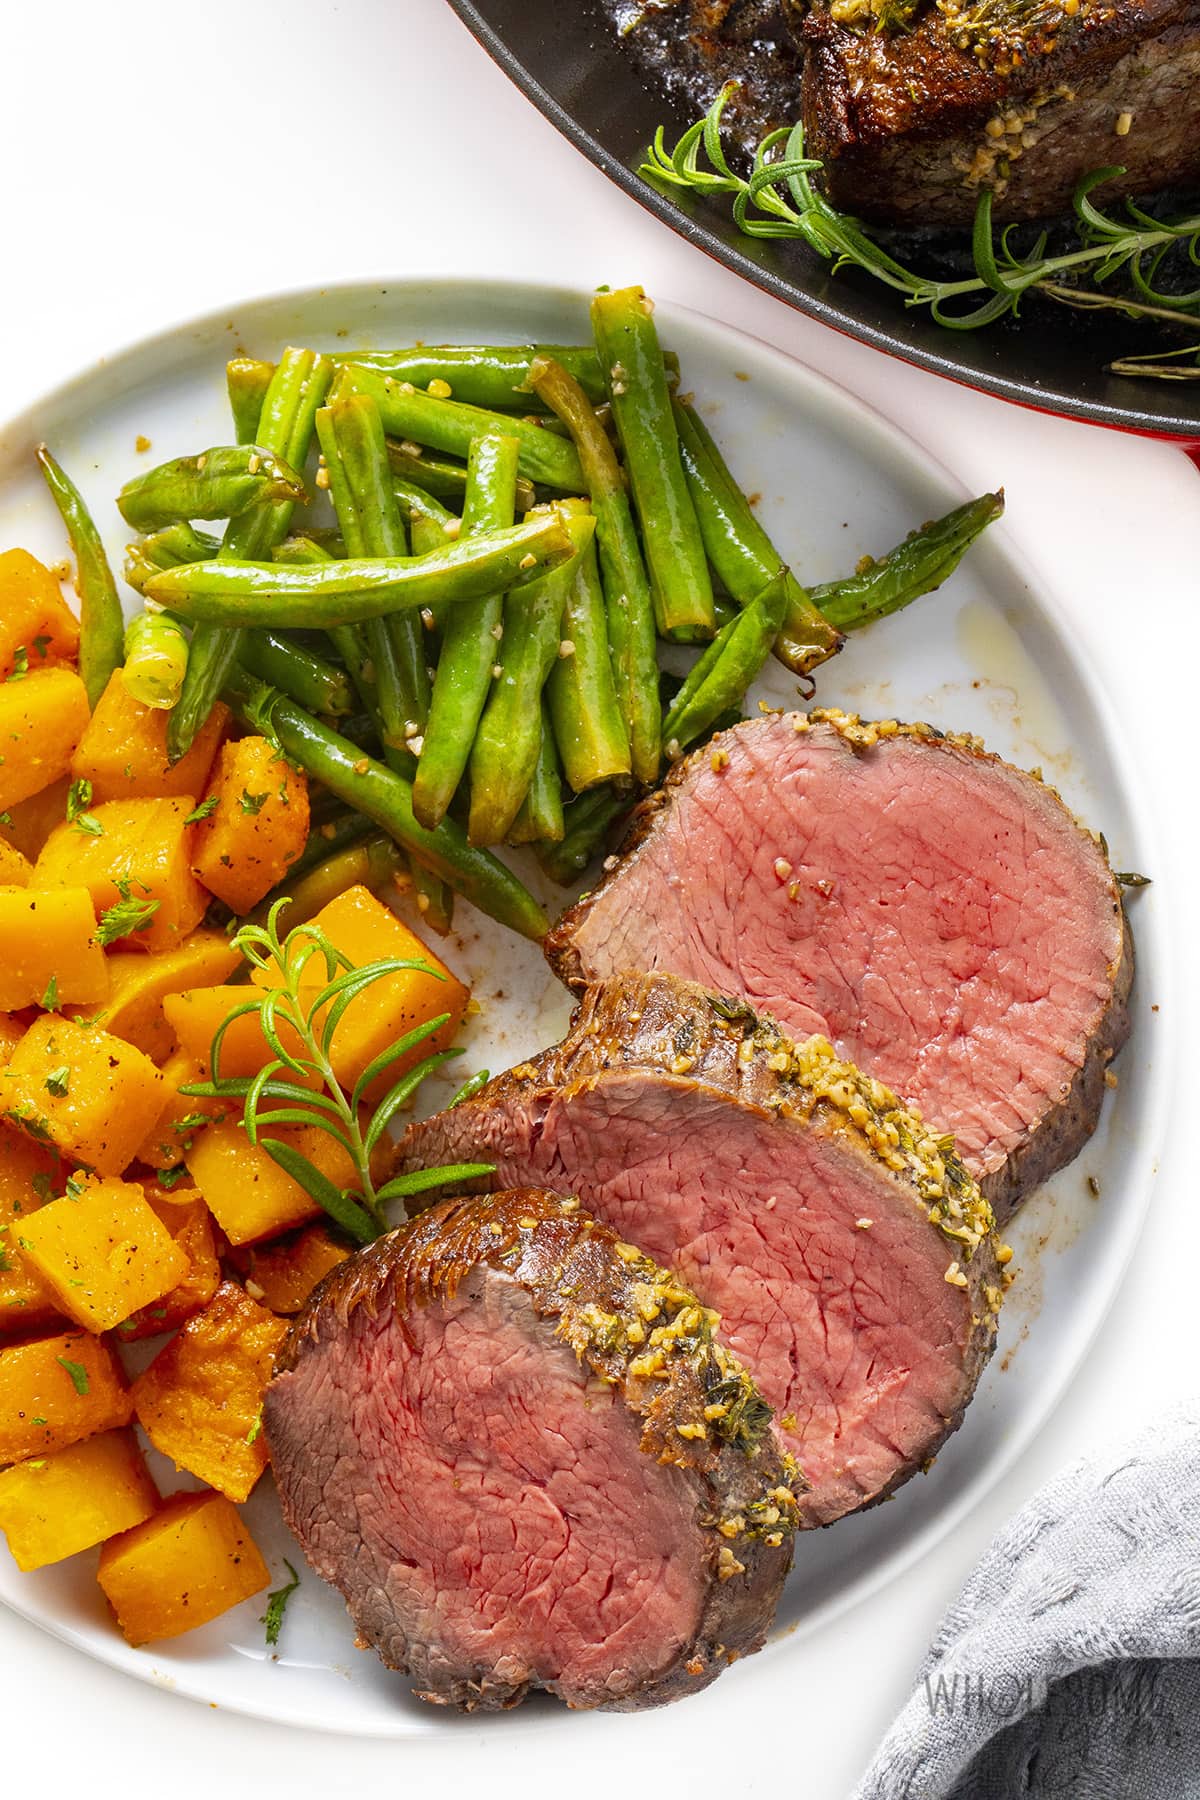 Plated beef tenderloin recipe with butternut squash and green beans.